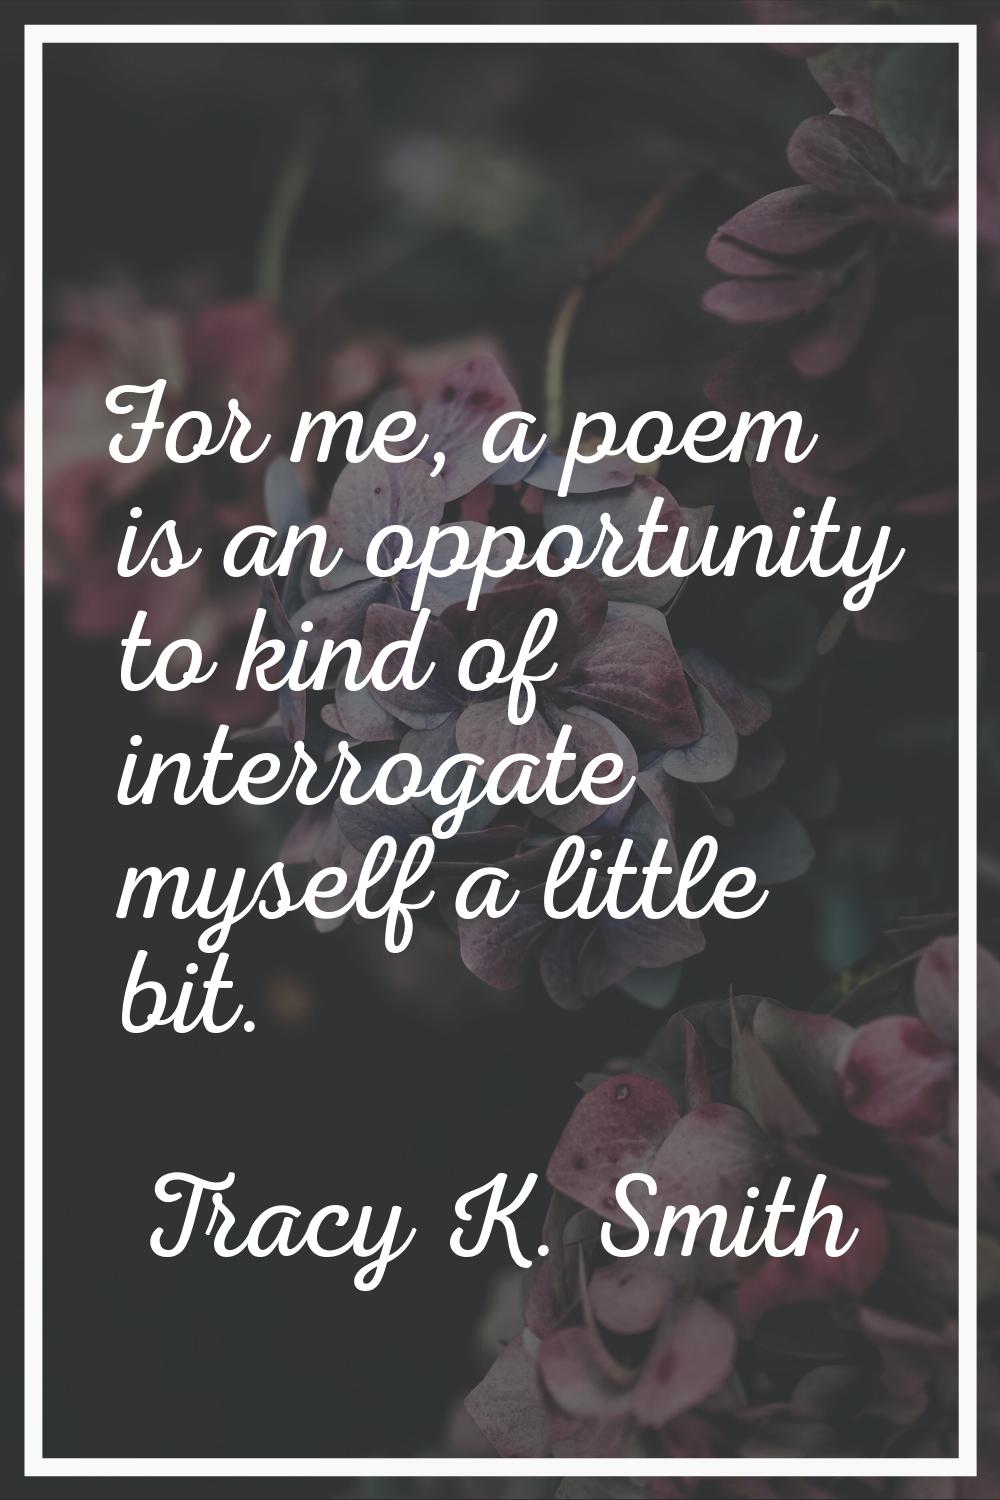 For me, a poem is an opportunity to kind of interrogate myself a little bit.